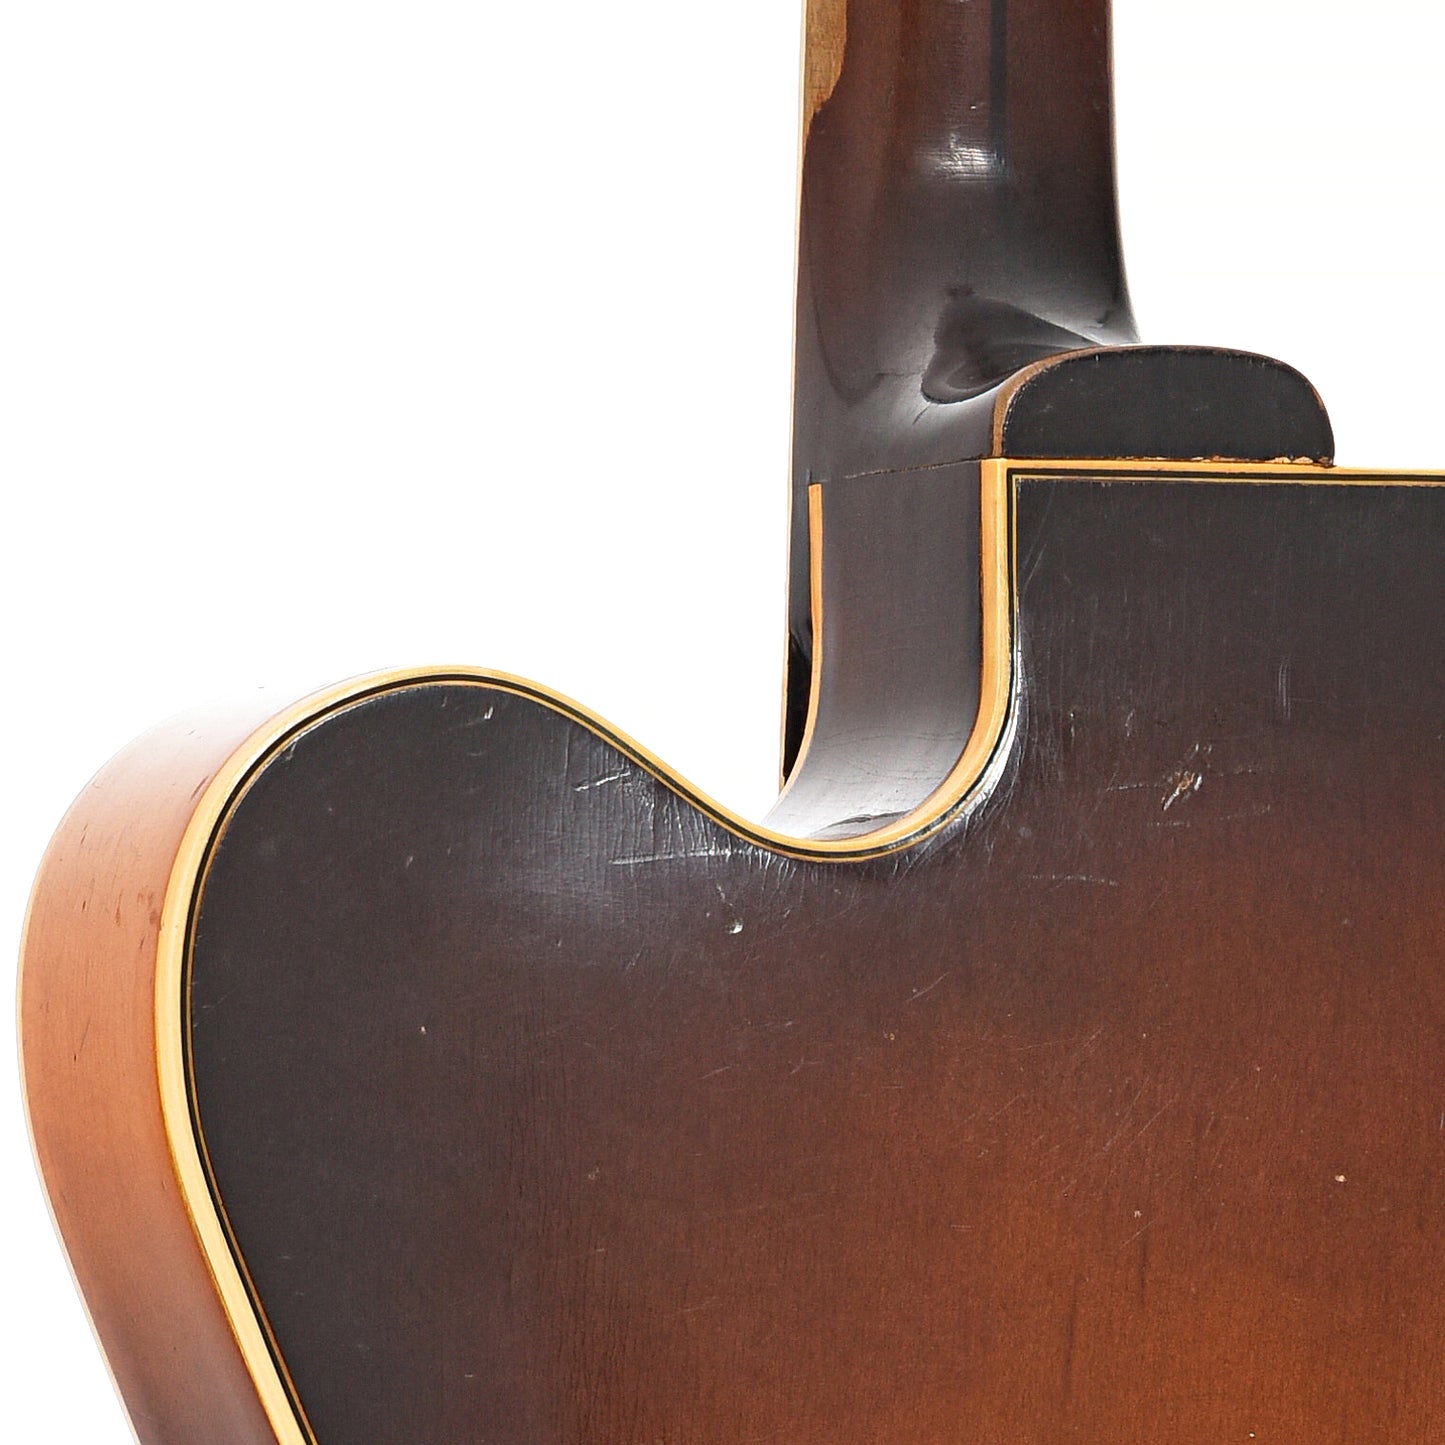 Neck joint of Gibson ES-5 Hollowbody Electric Guitar (1950)